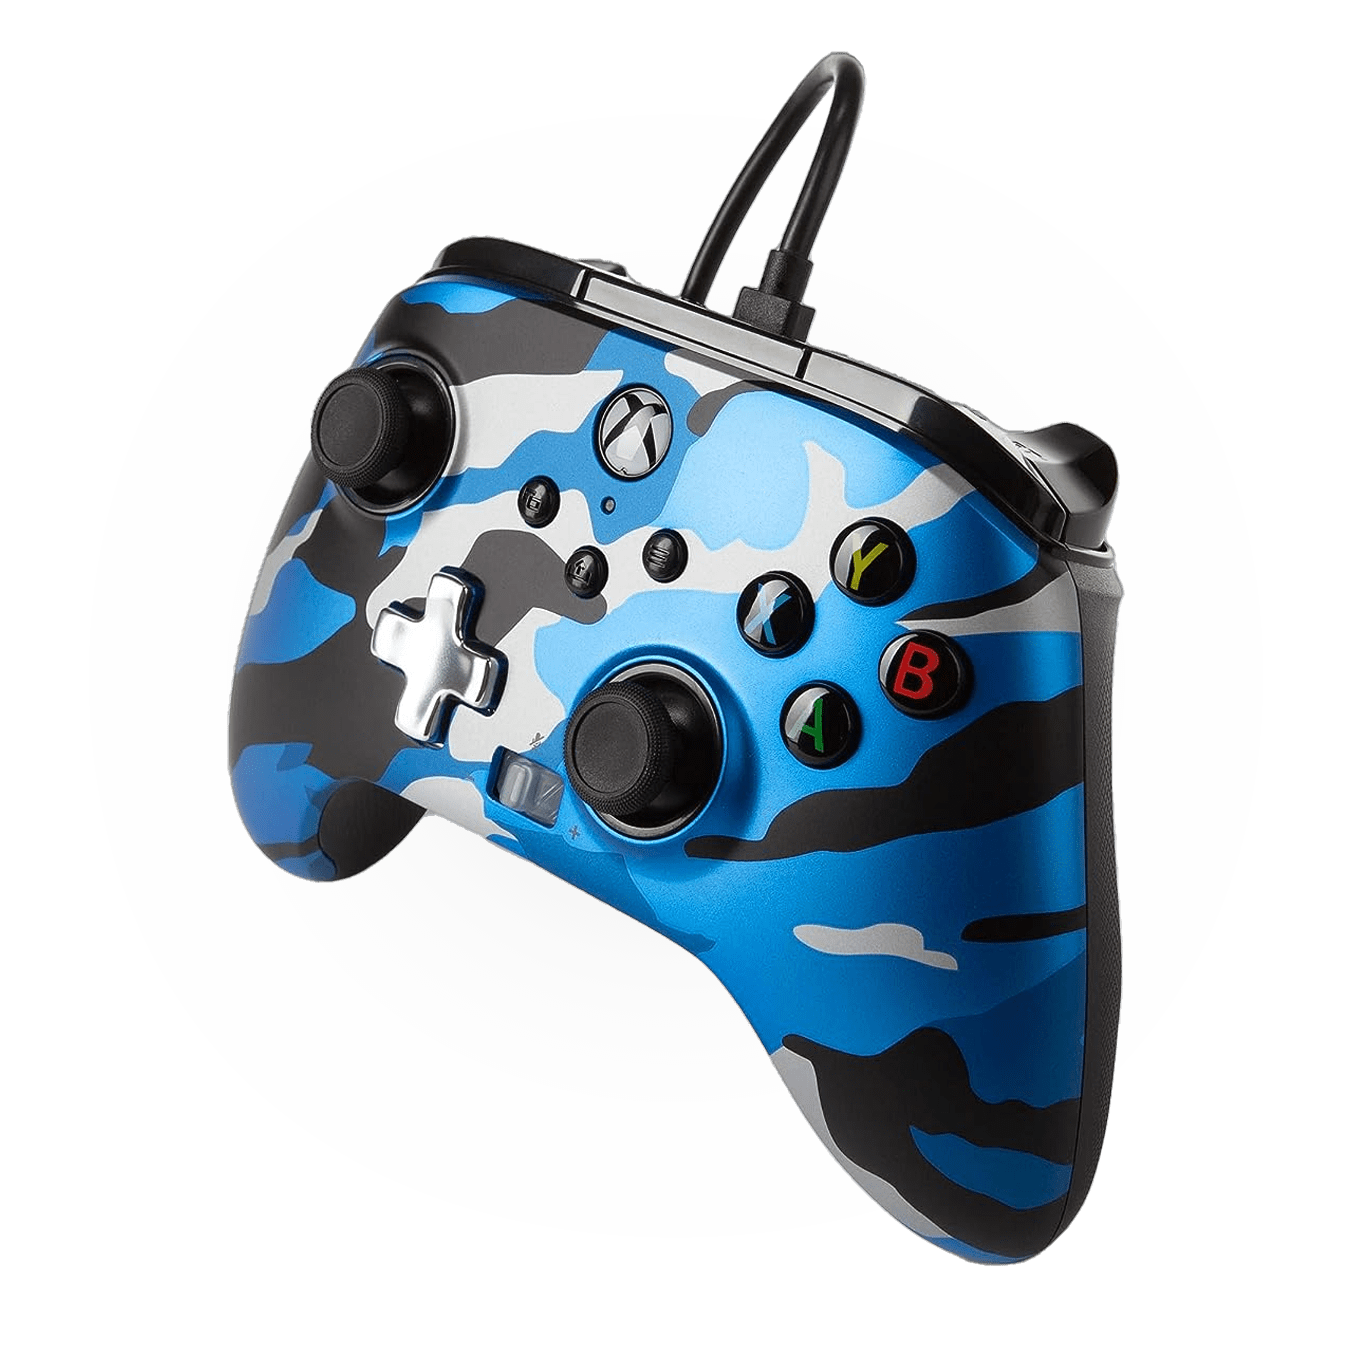 PowerA Enhanced Wired Controller For Xbox Series X|S With 2 Re-mappable Buttons - Metallic Blue Camo - ModdedZone